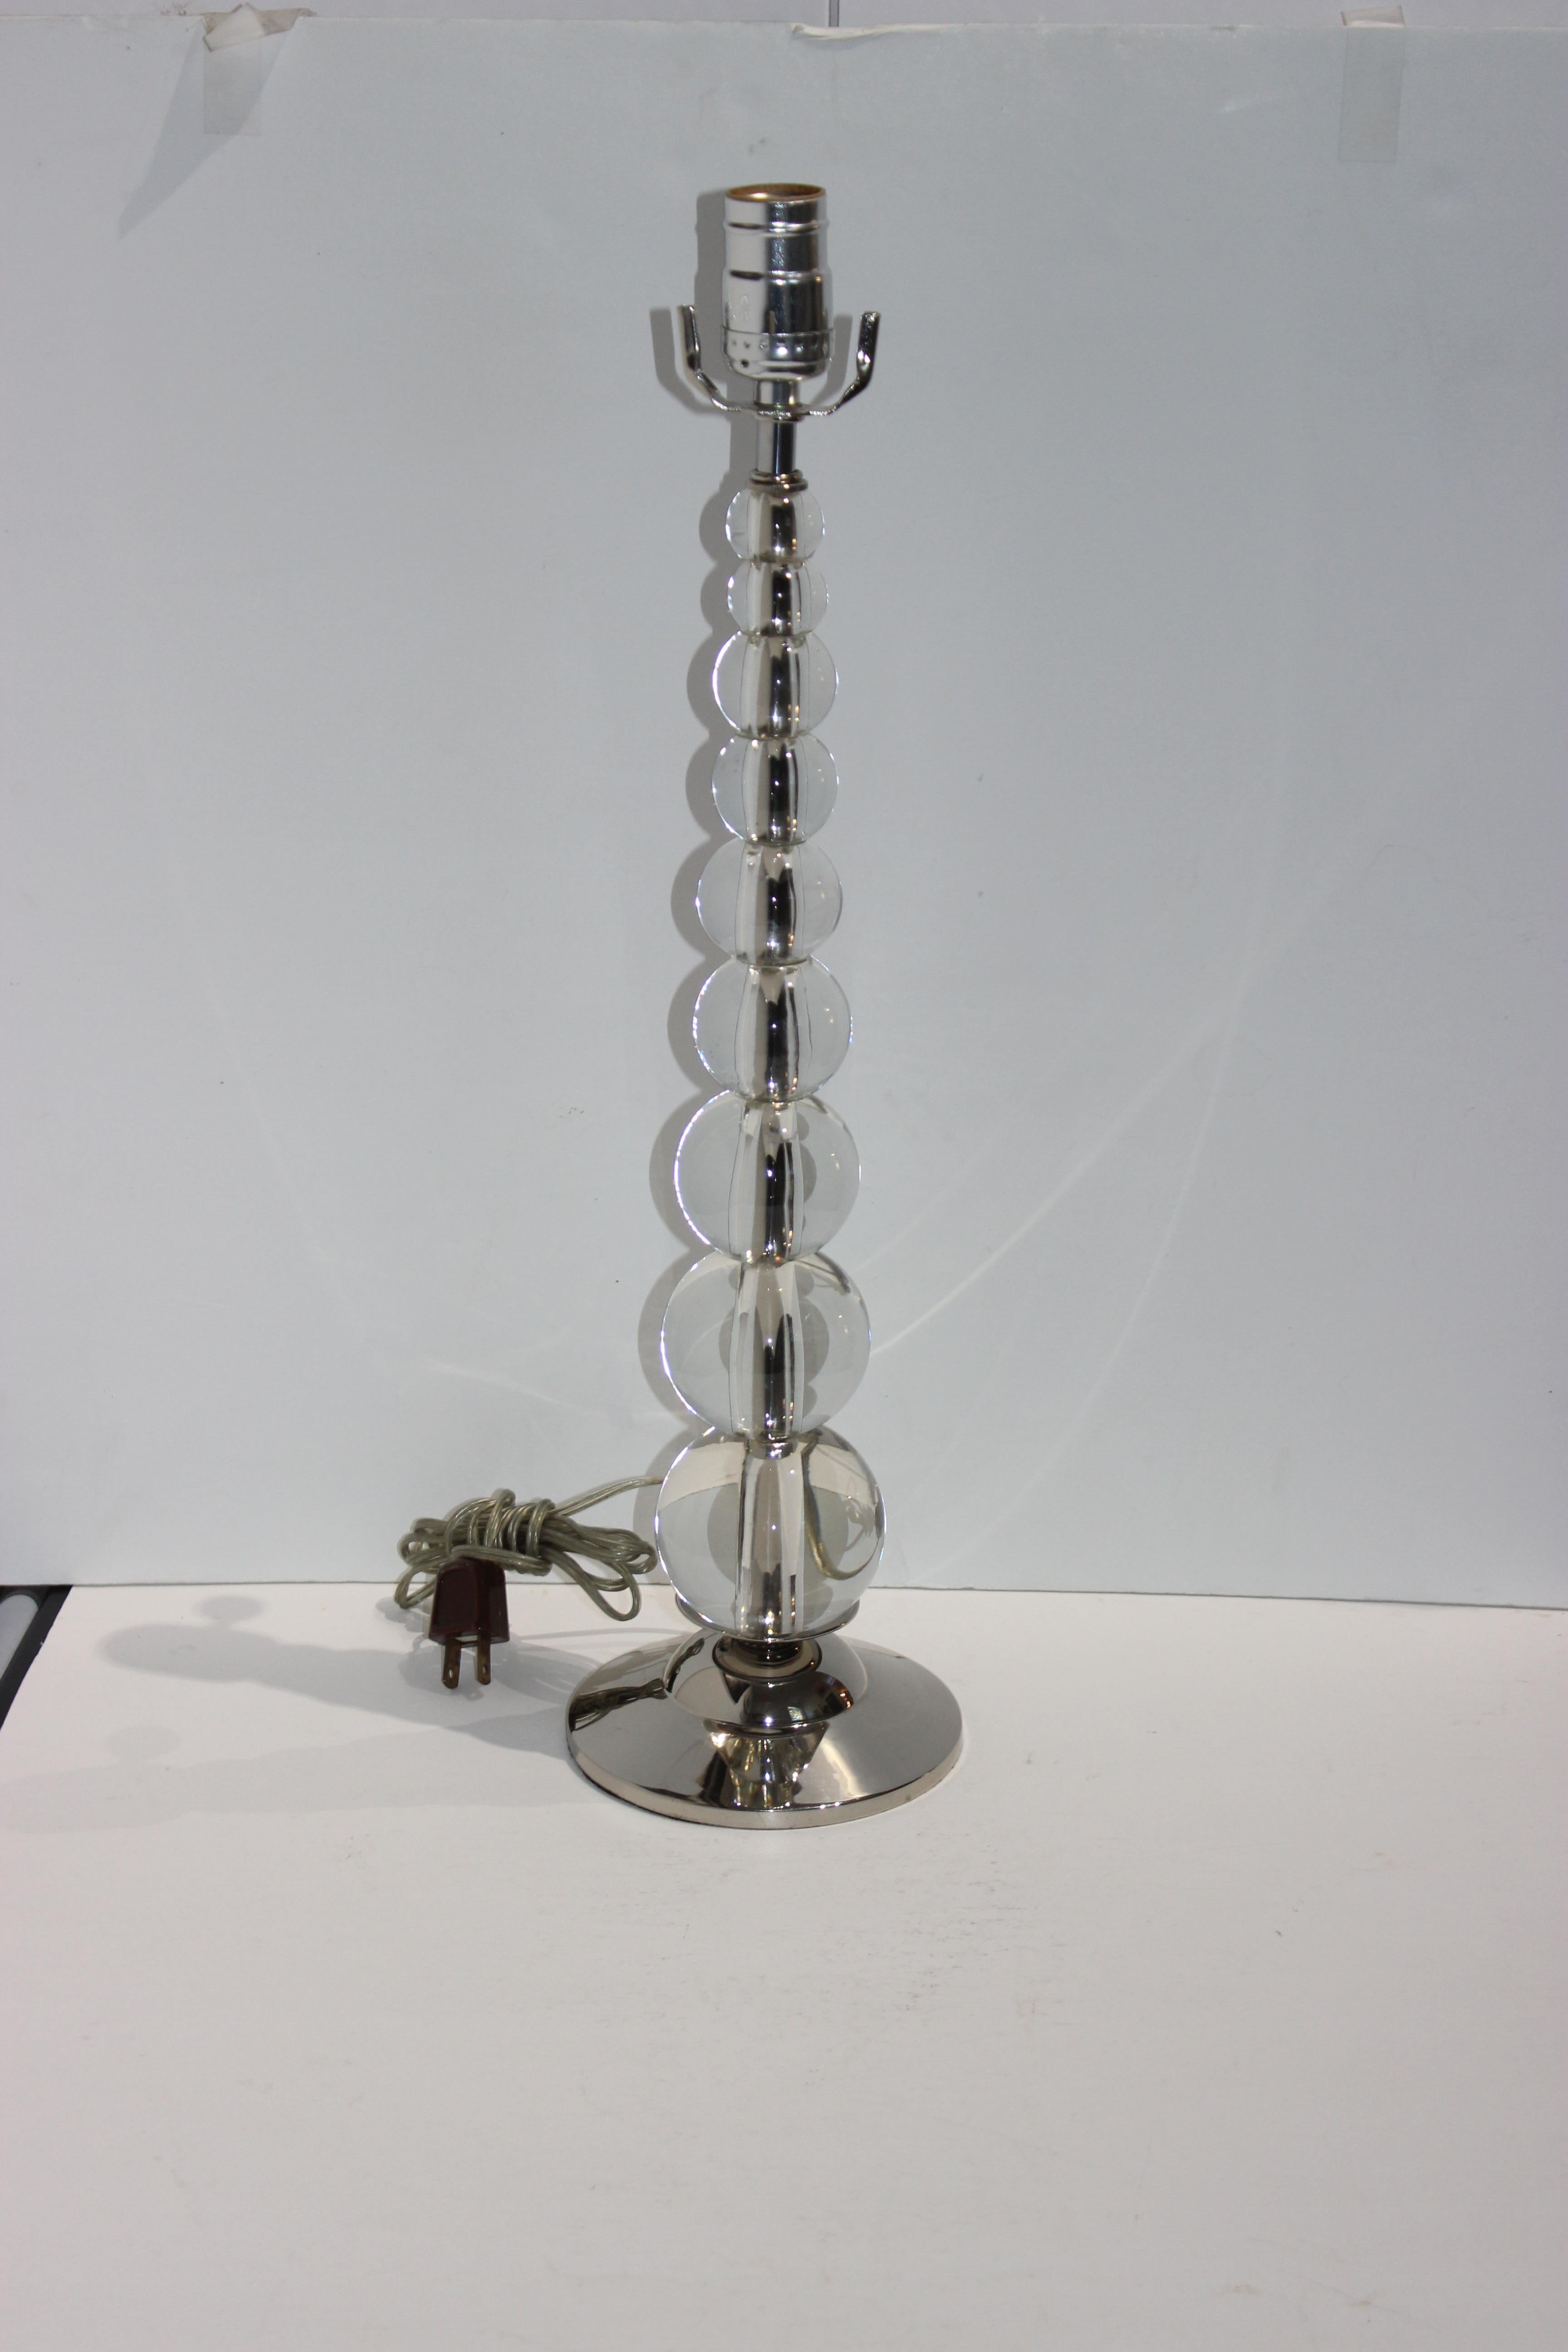 This stylish and chic American Art Deco table lamp was acquired from a Coral Gables estate and it dates to the 1930s. The graduating stacking glass spheres give the piece a lite and clean look.